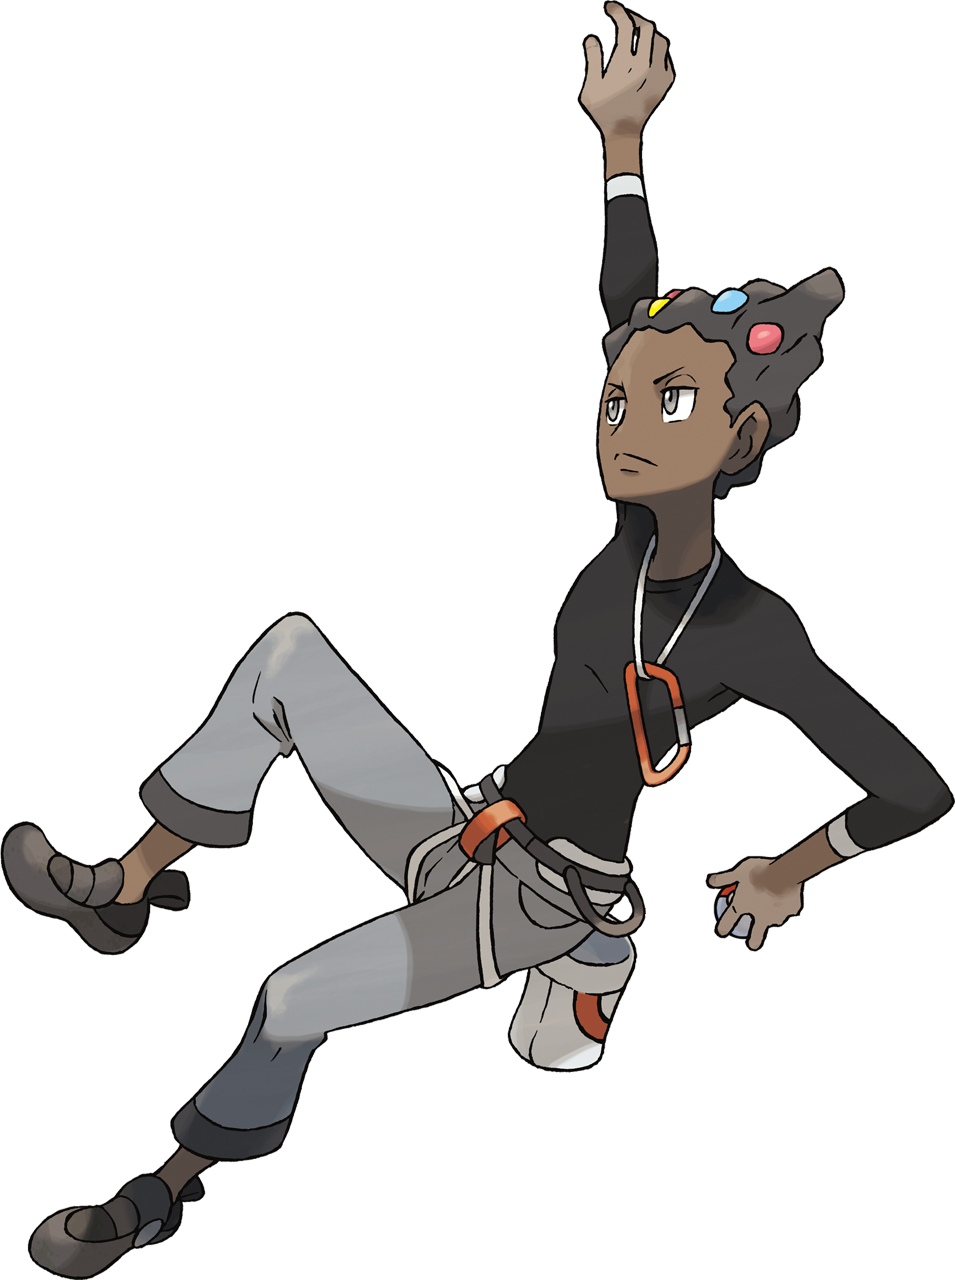 Pokémon XY: Everything You Need to Know About the Characters 